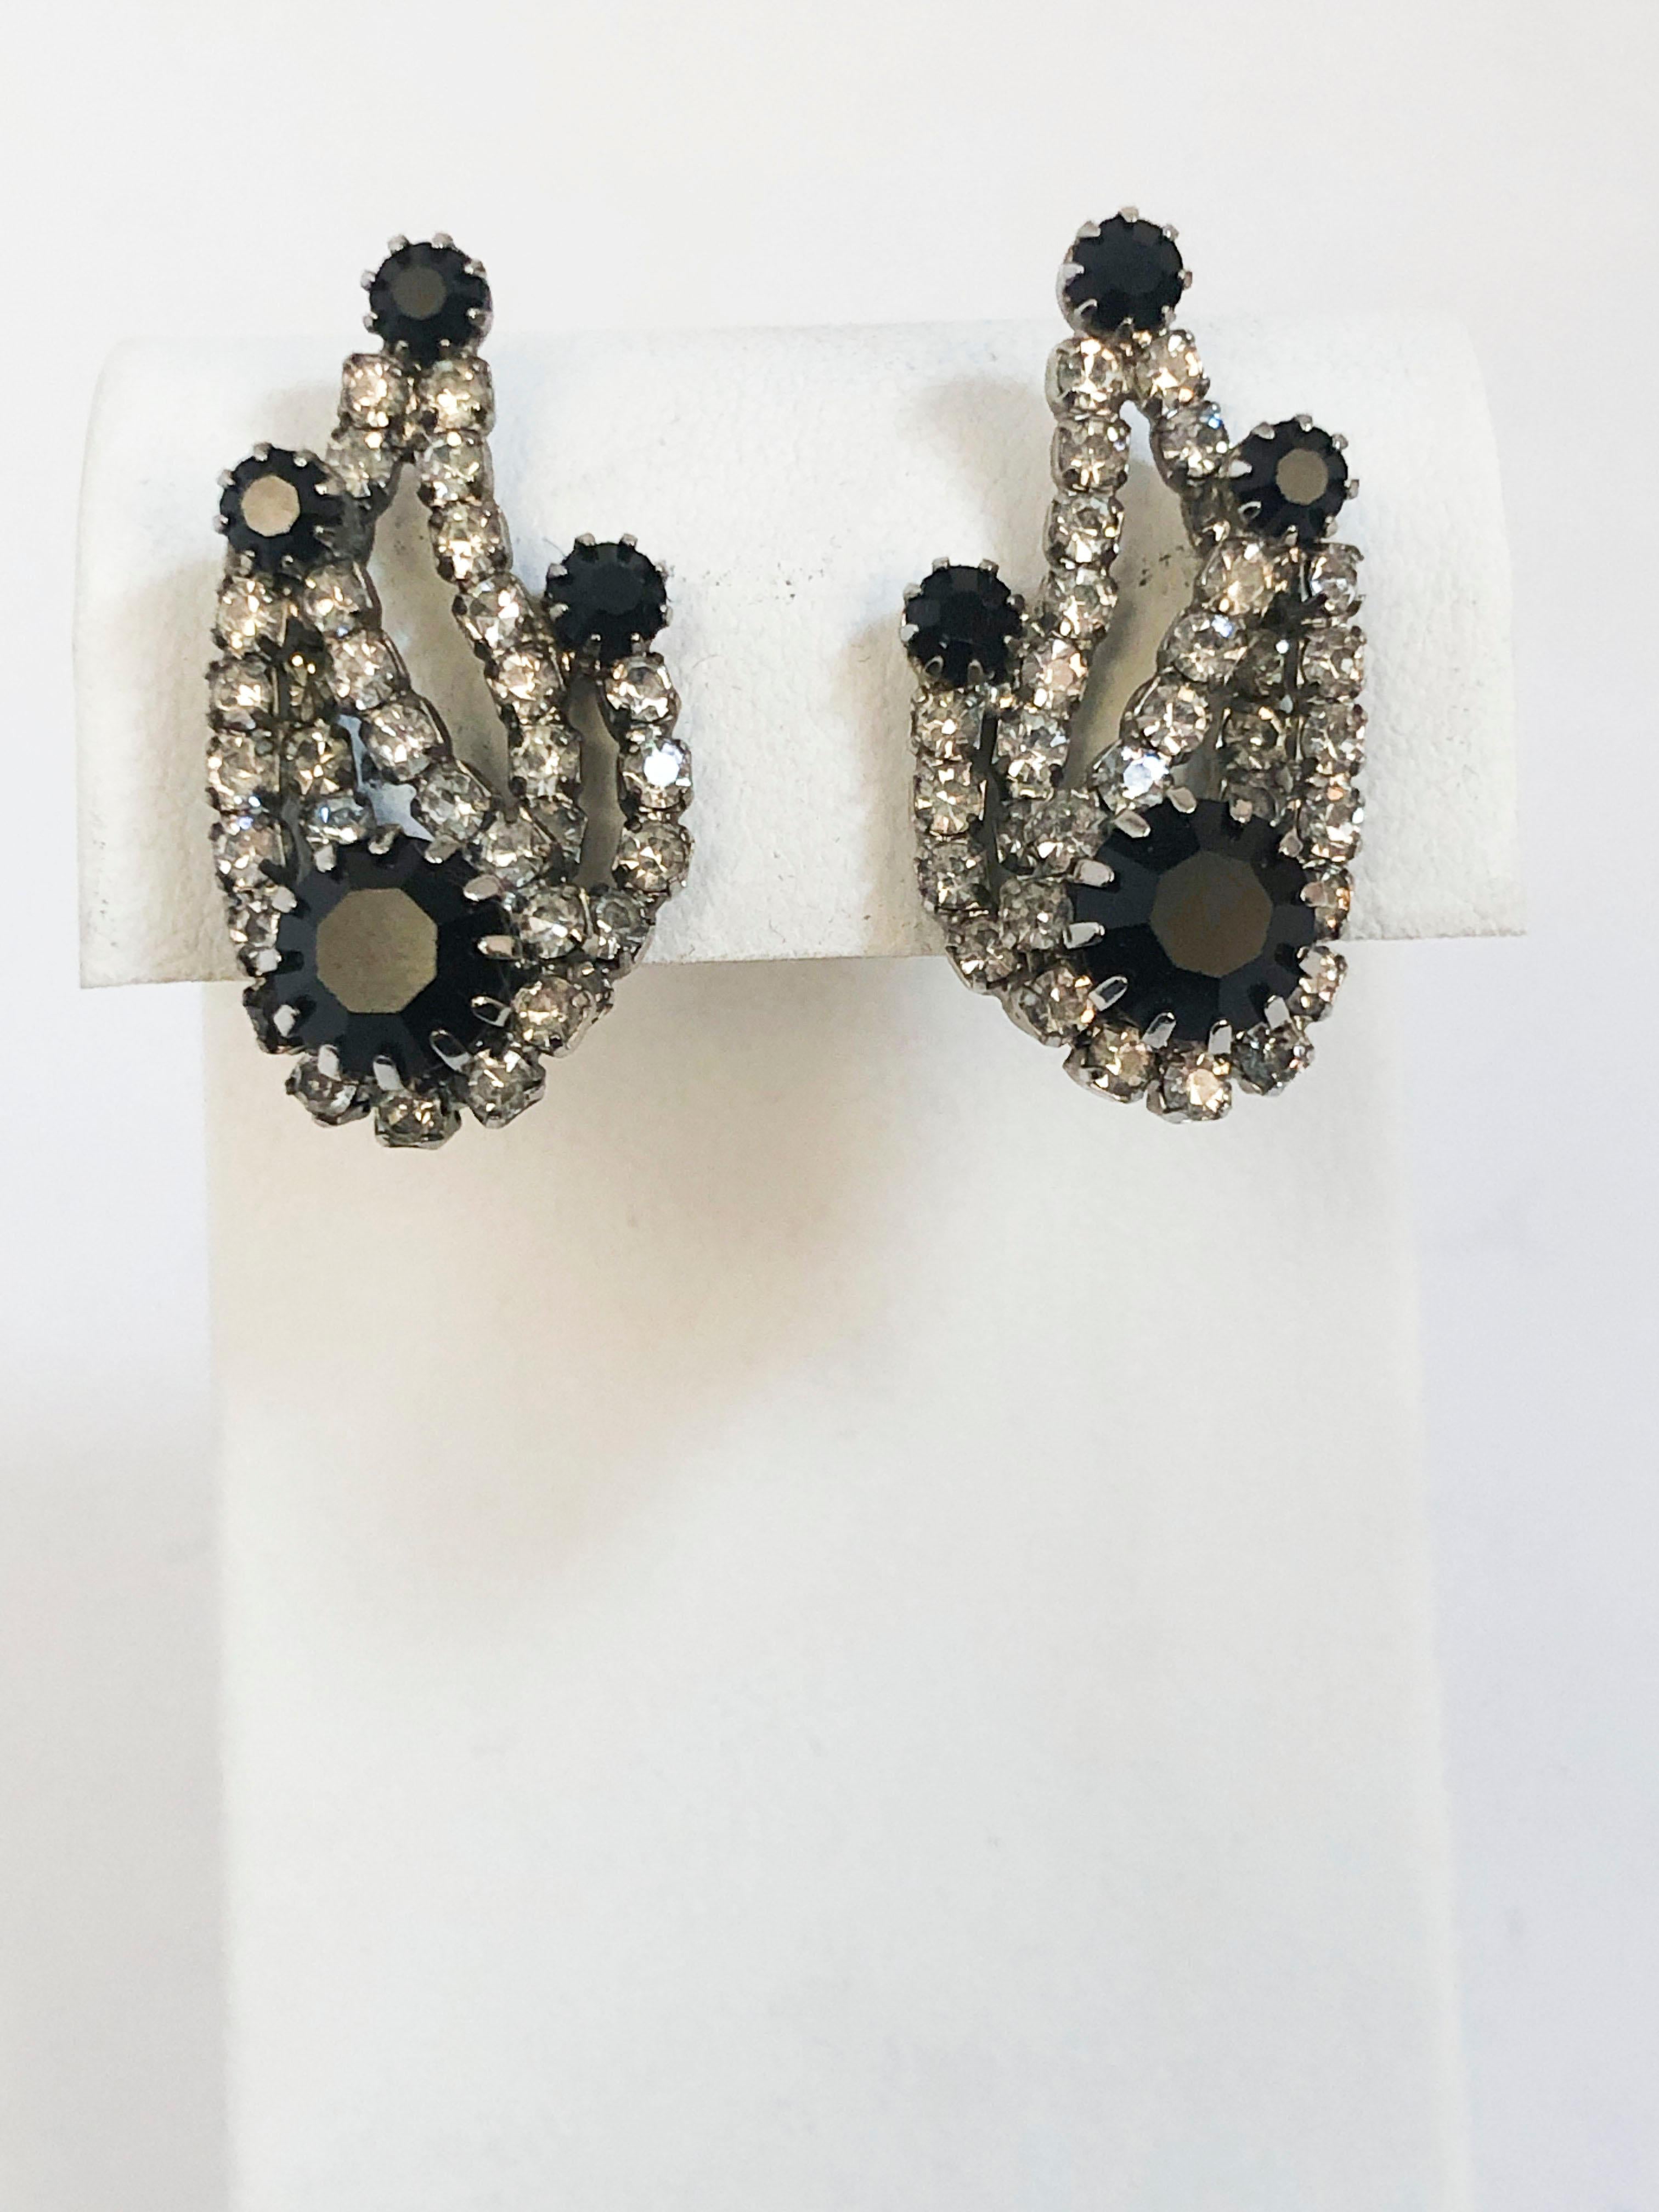 1950s Kramer Clip on Clear and Black Rhinestone Earrings with 3-dimensional layering.